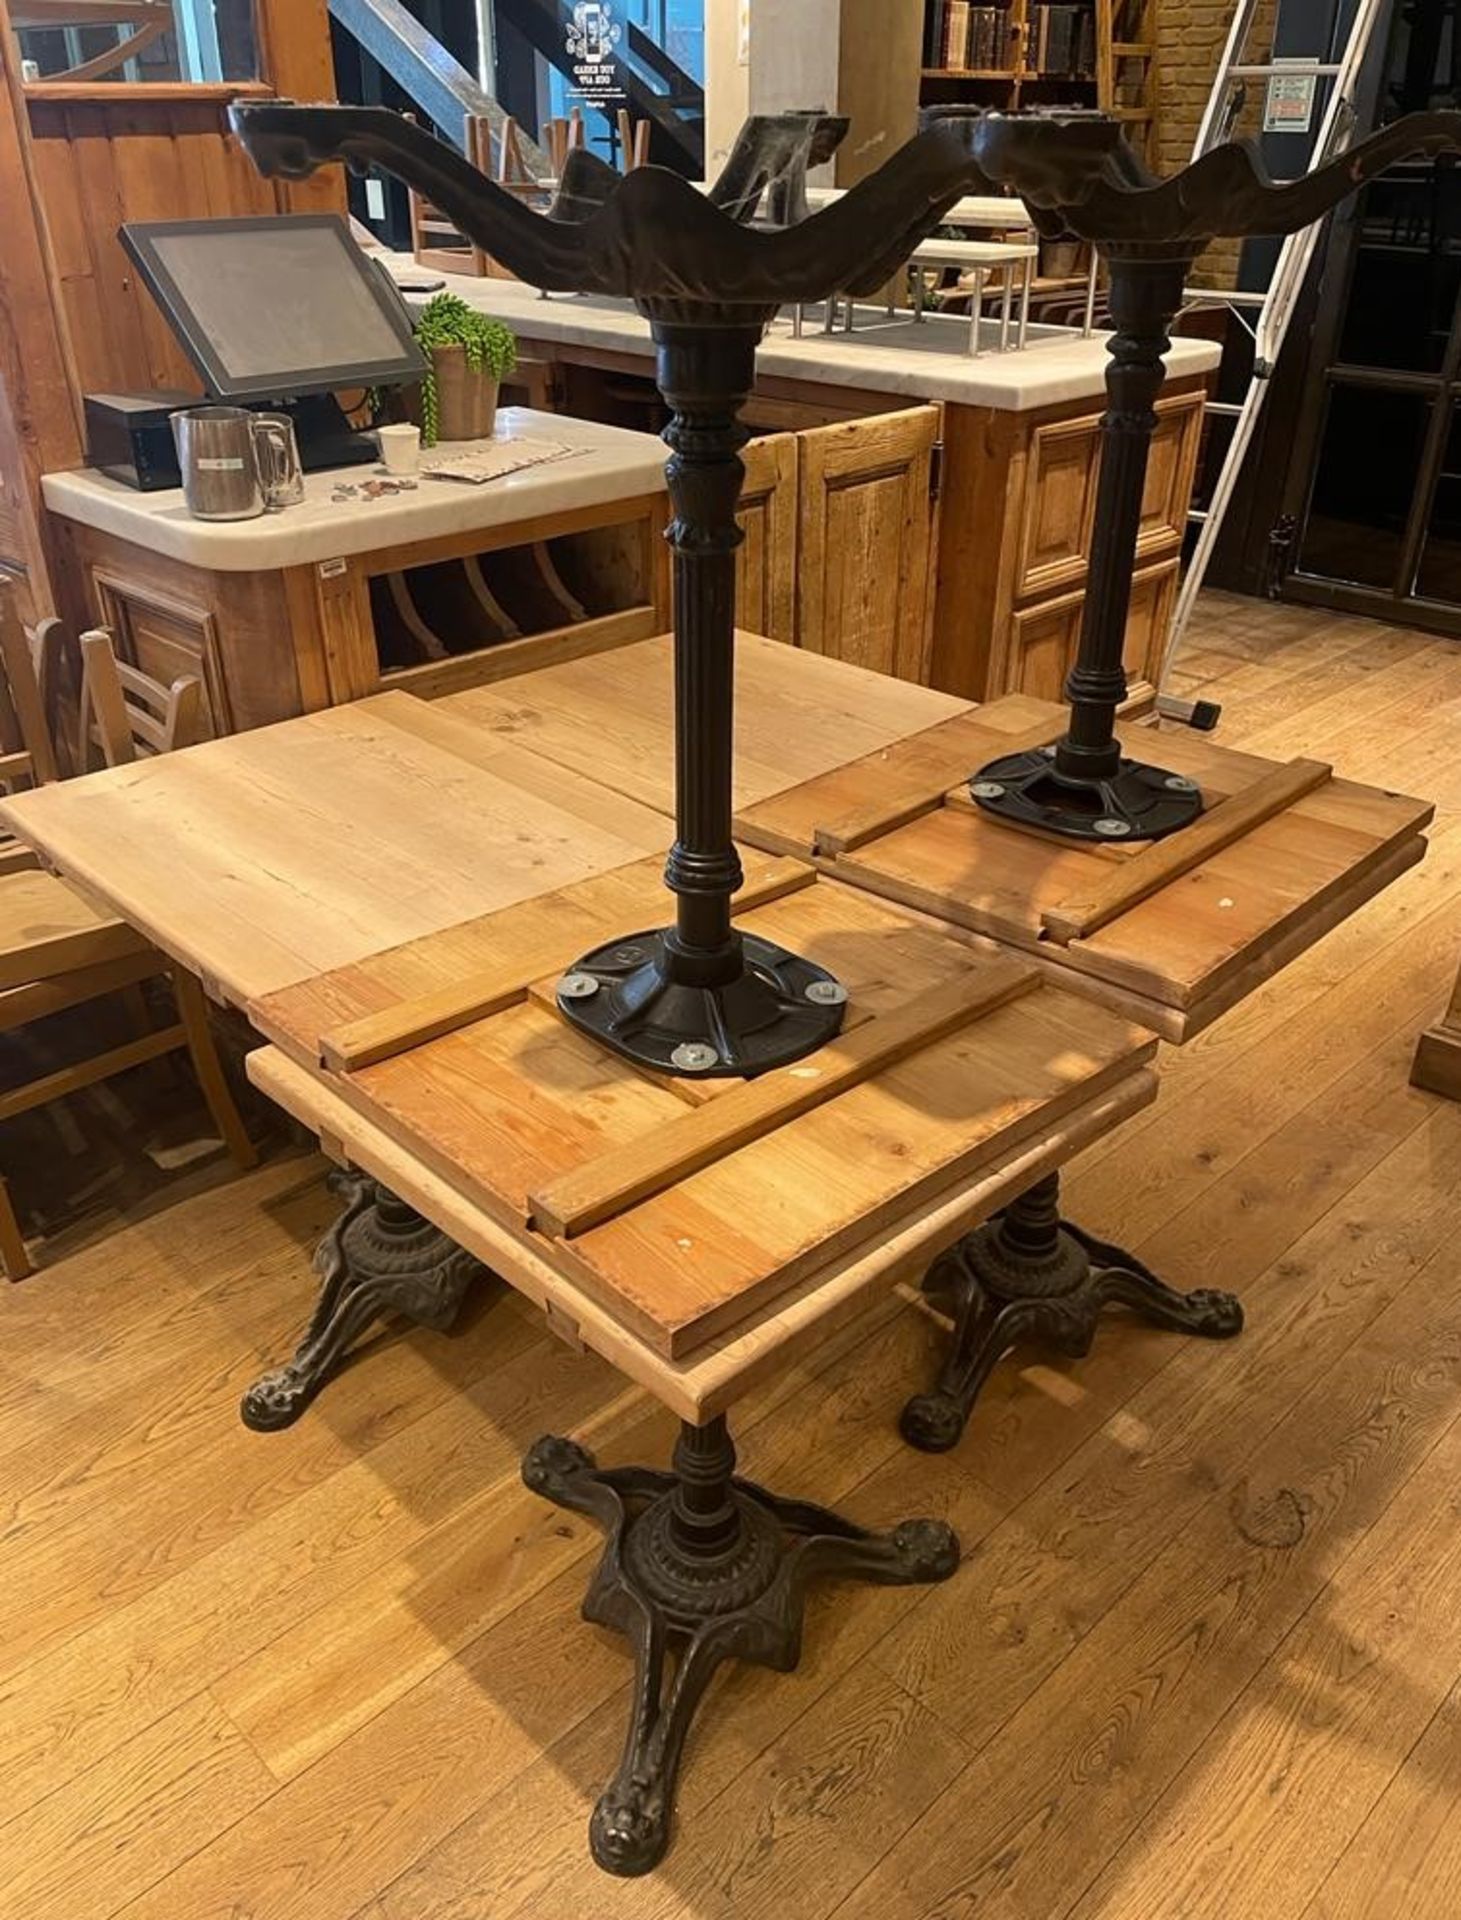 4 x Restaurant Dining Tables With Cast Iron Ornate Bases and Rotating Solid Wood Tops - Image 3 of 16